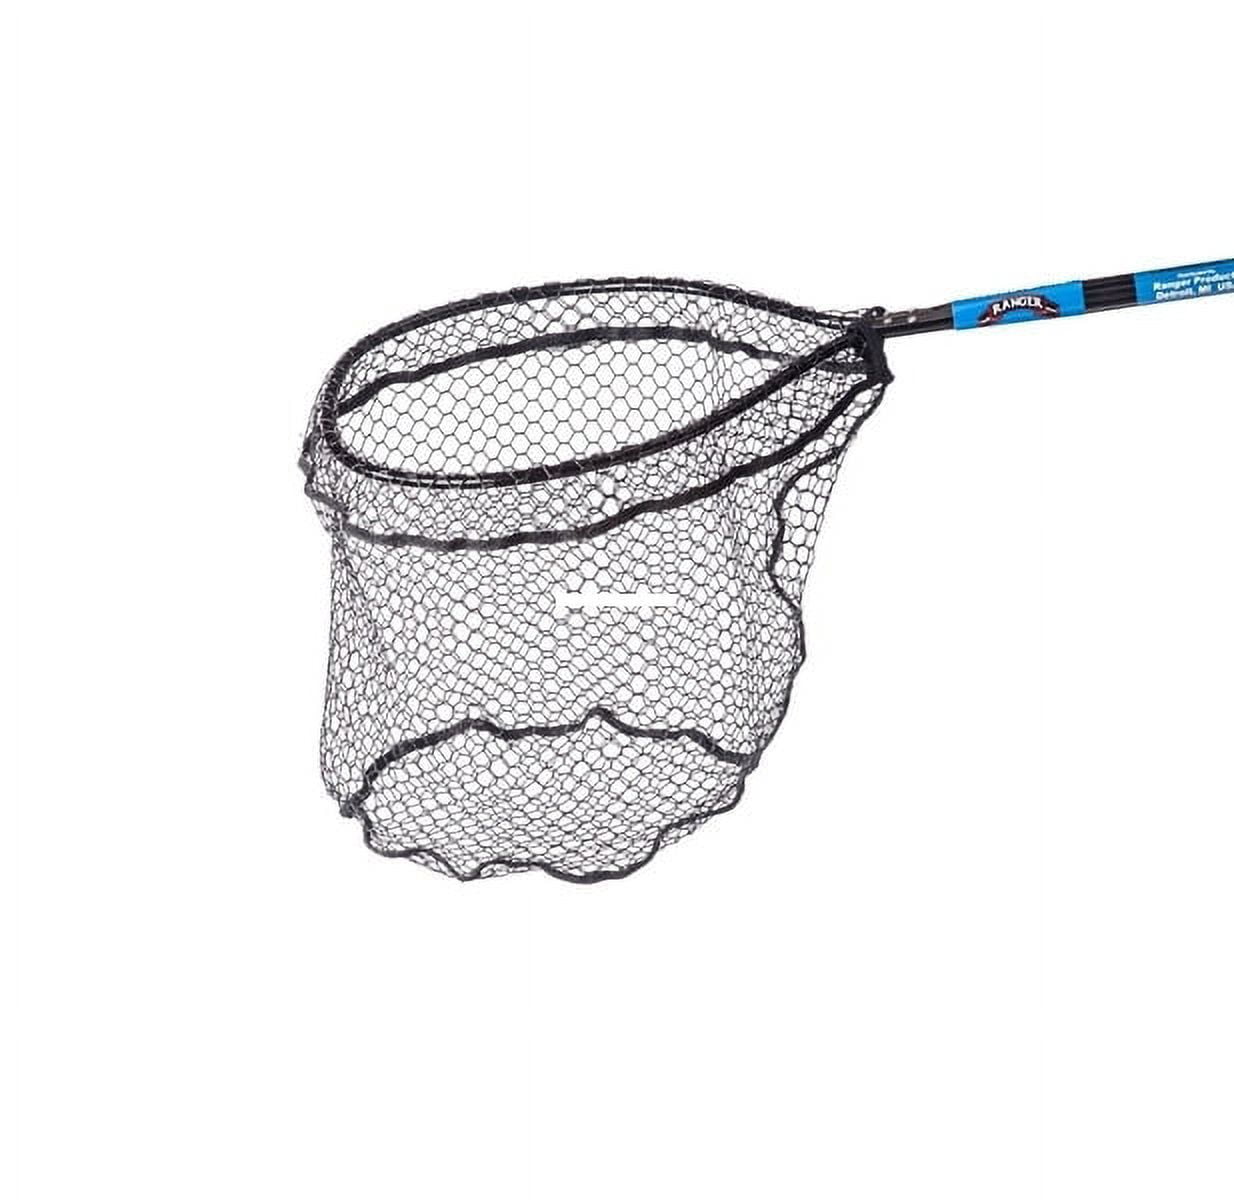 Ranger 345R Hook-Free and Tangle Free Molded Rubber Knotless Landing Net  (36-Inch Handle, 18-Inch Round Hoop, 14-Inch Net Depth)